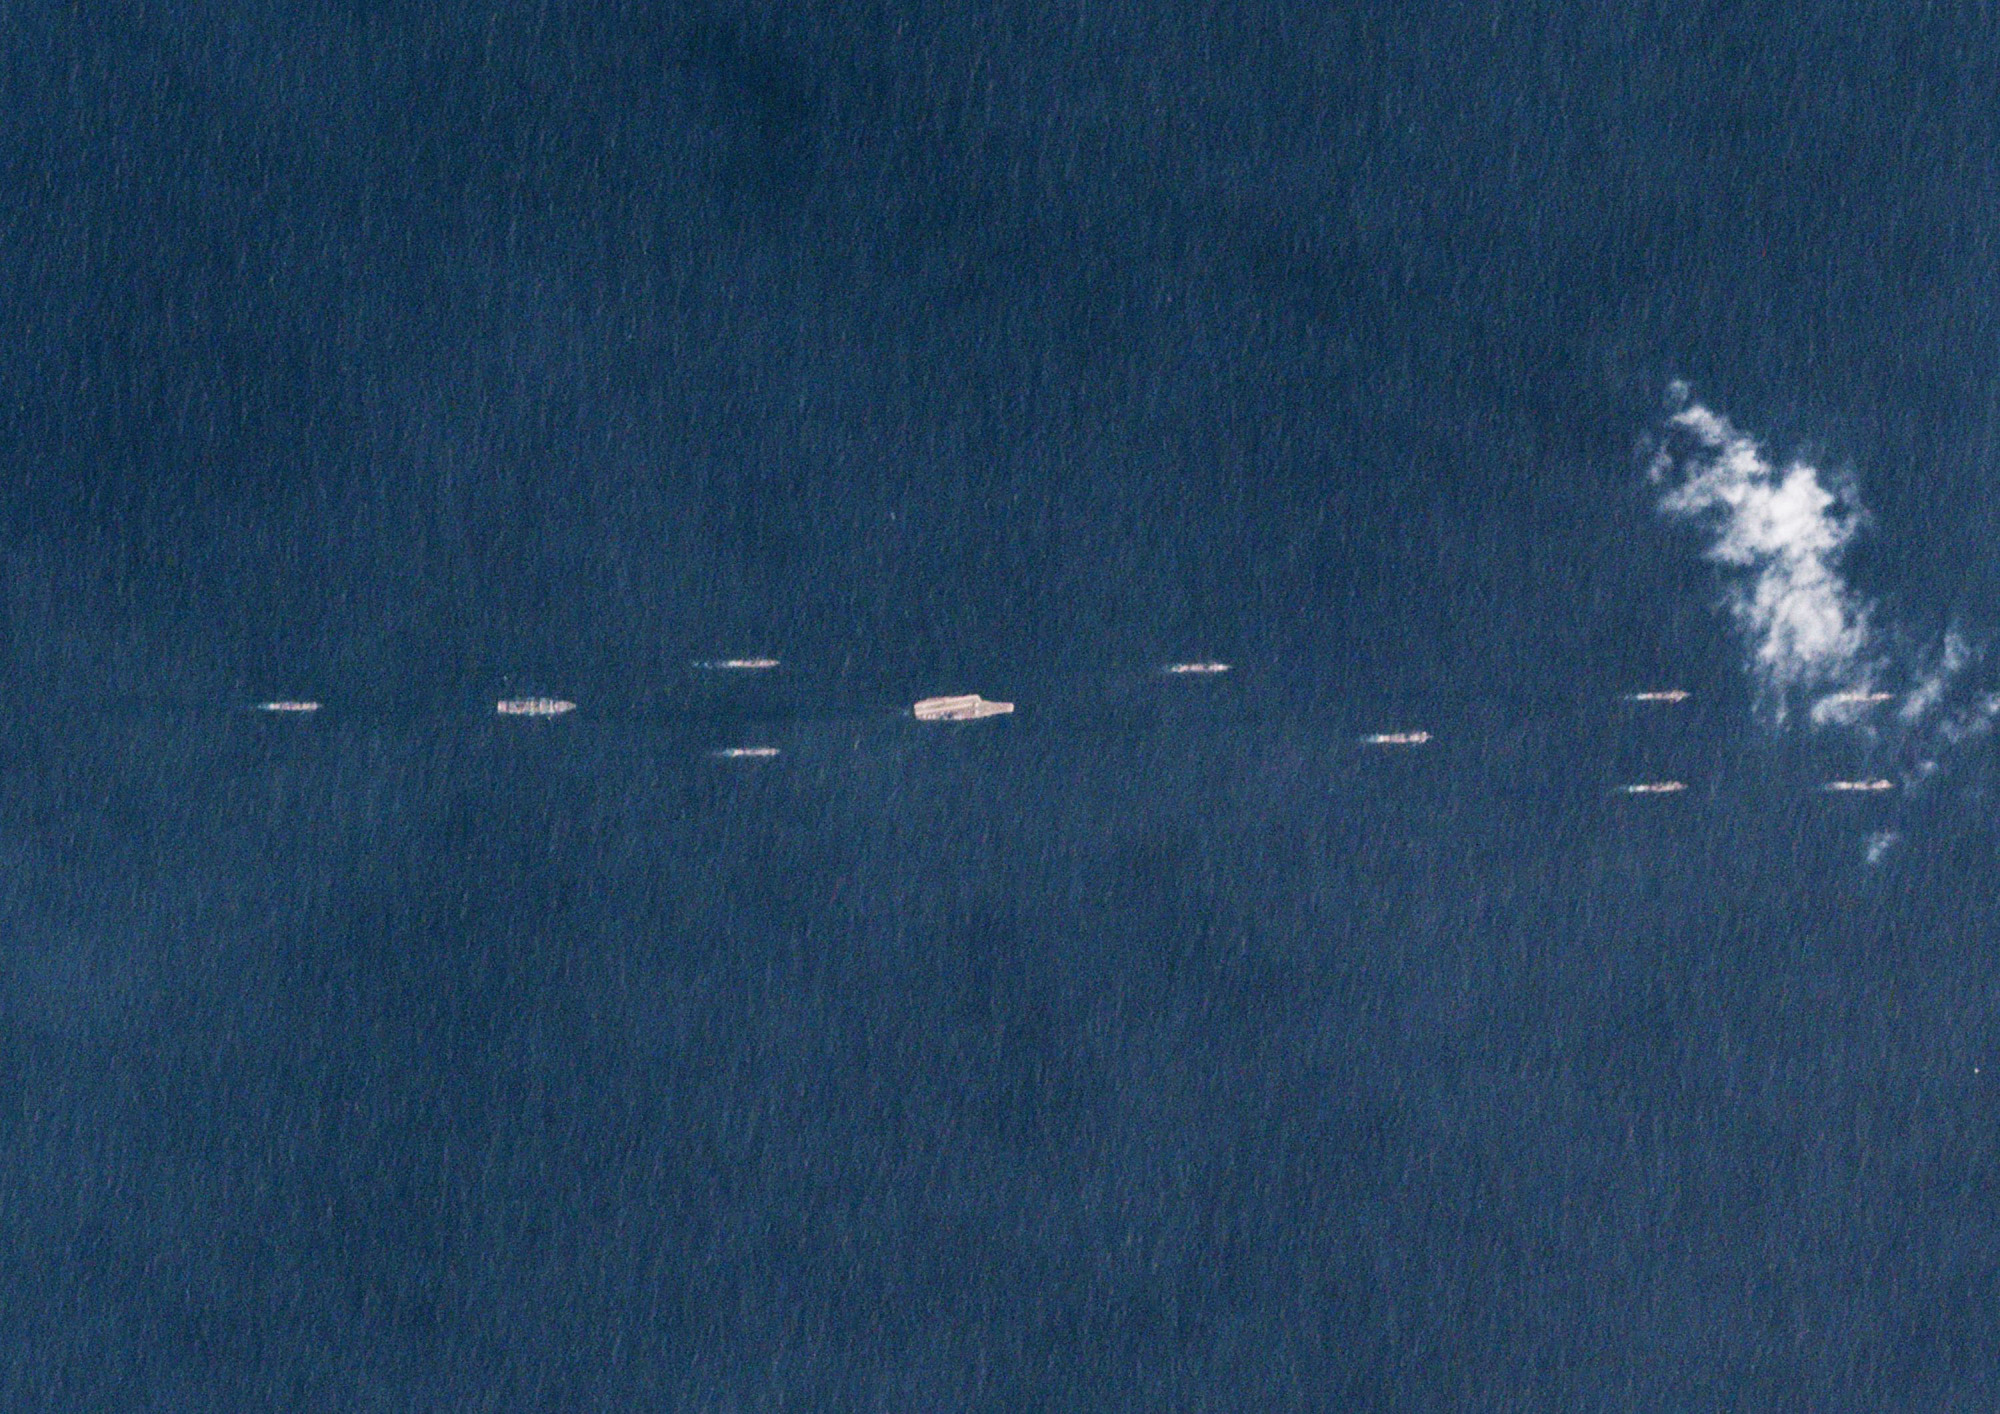 China's sole operational aircraft carrier, the Liaoning (center), is shown sailing with other ships at sea just south of Hainan Island on March 26 in a satellite photo released March 30. Beijing has been flexing its military muscles in recent days, conducting massive naval drills in the South China Sea. | AFP-JIJI